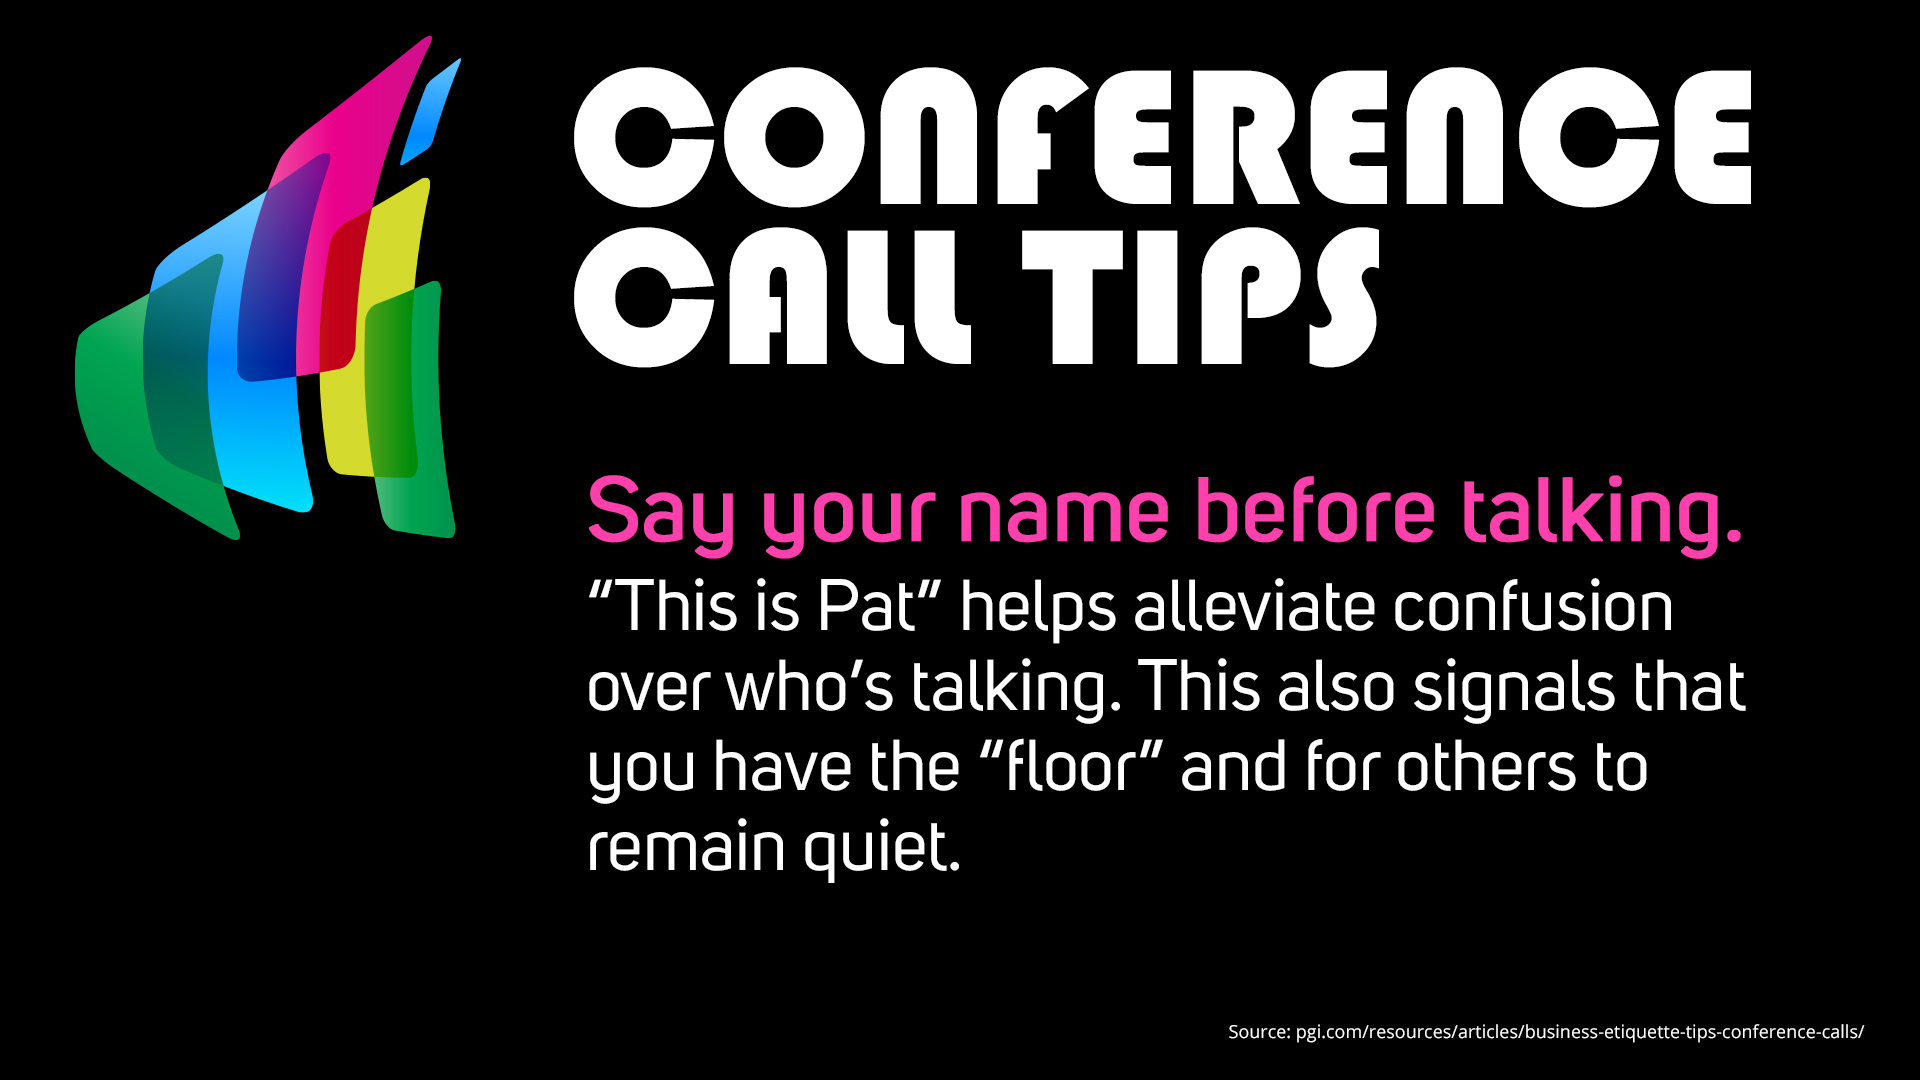 Free Graphic | Conference Call Tips | Say your name before talking